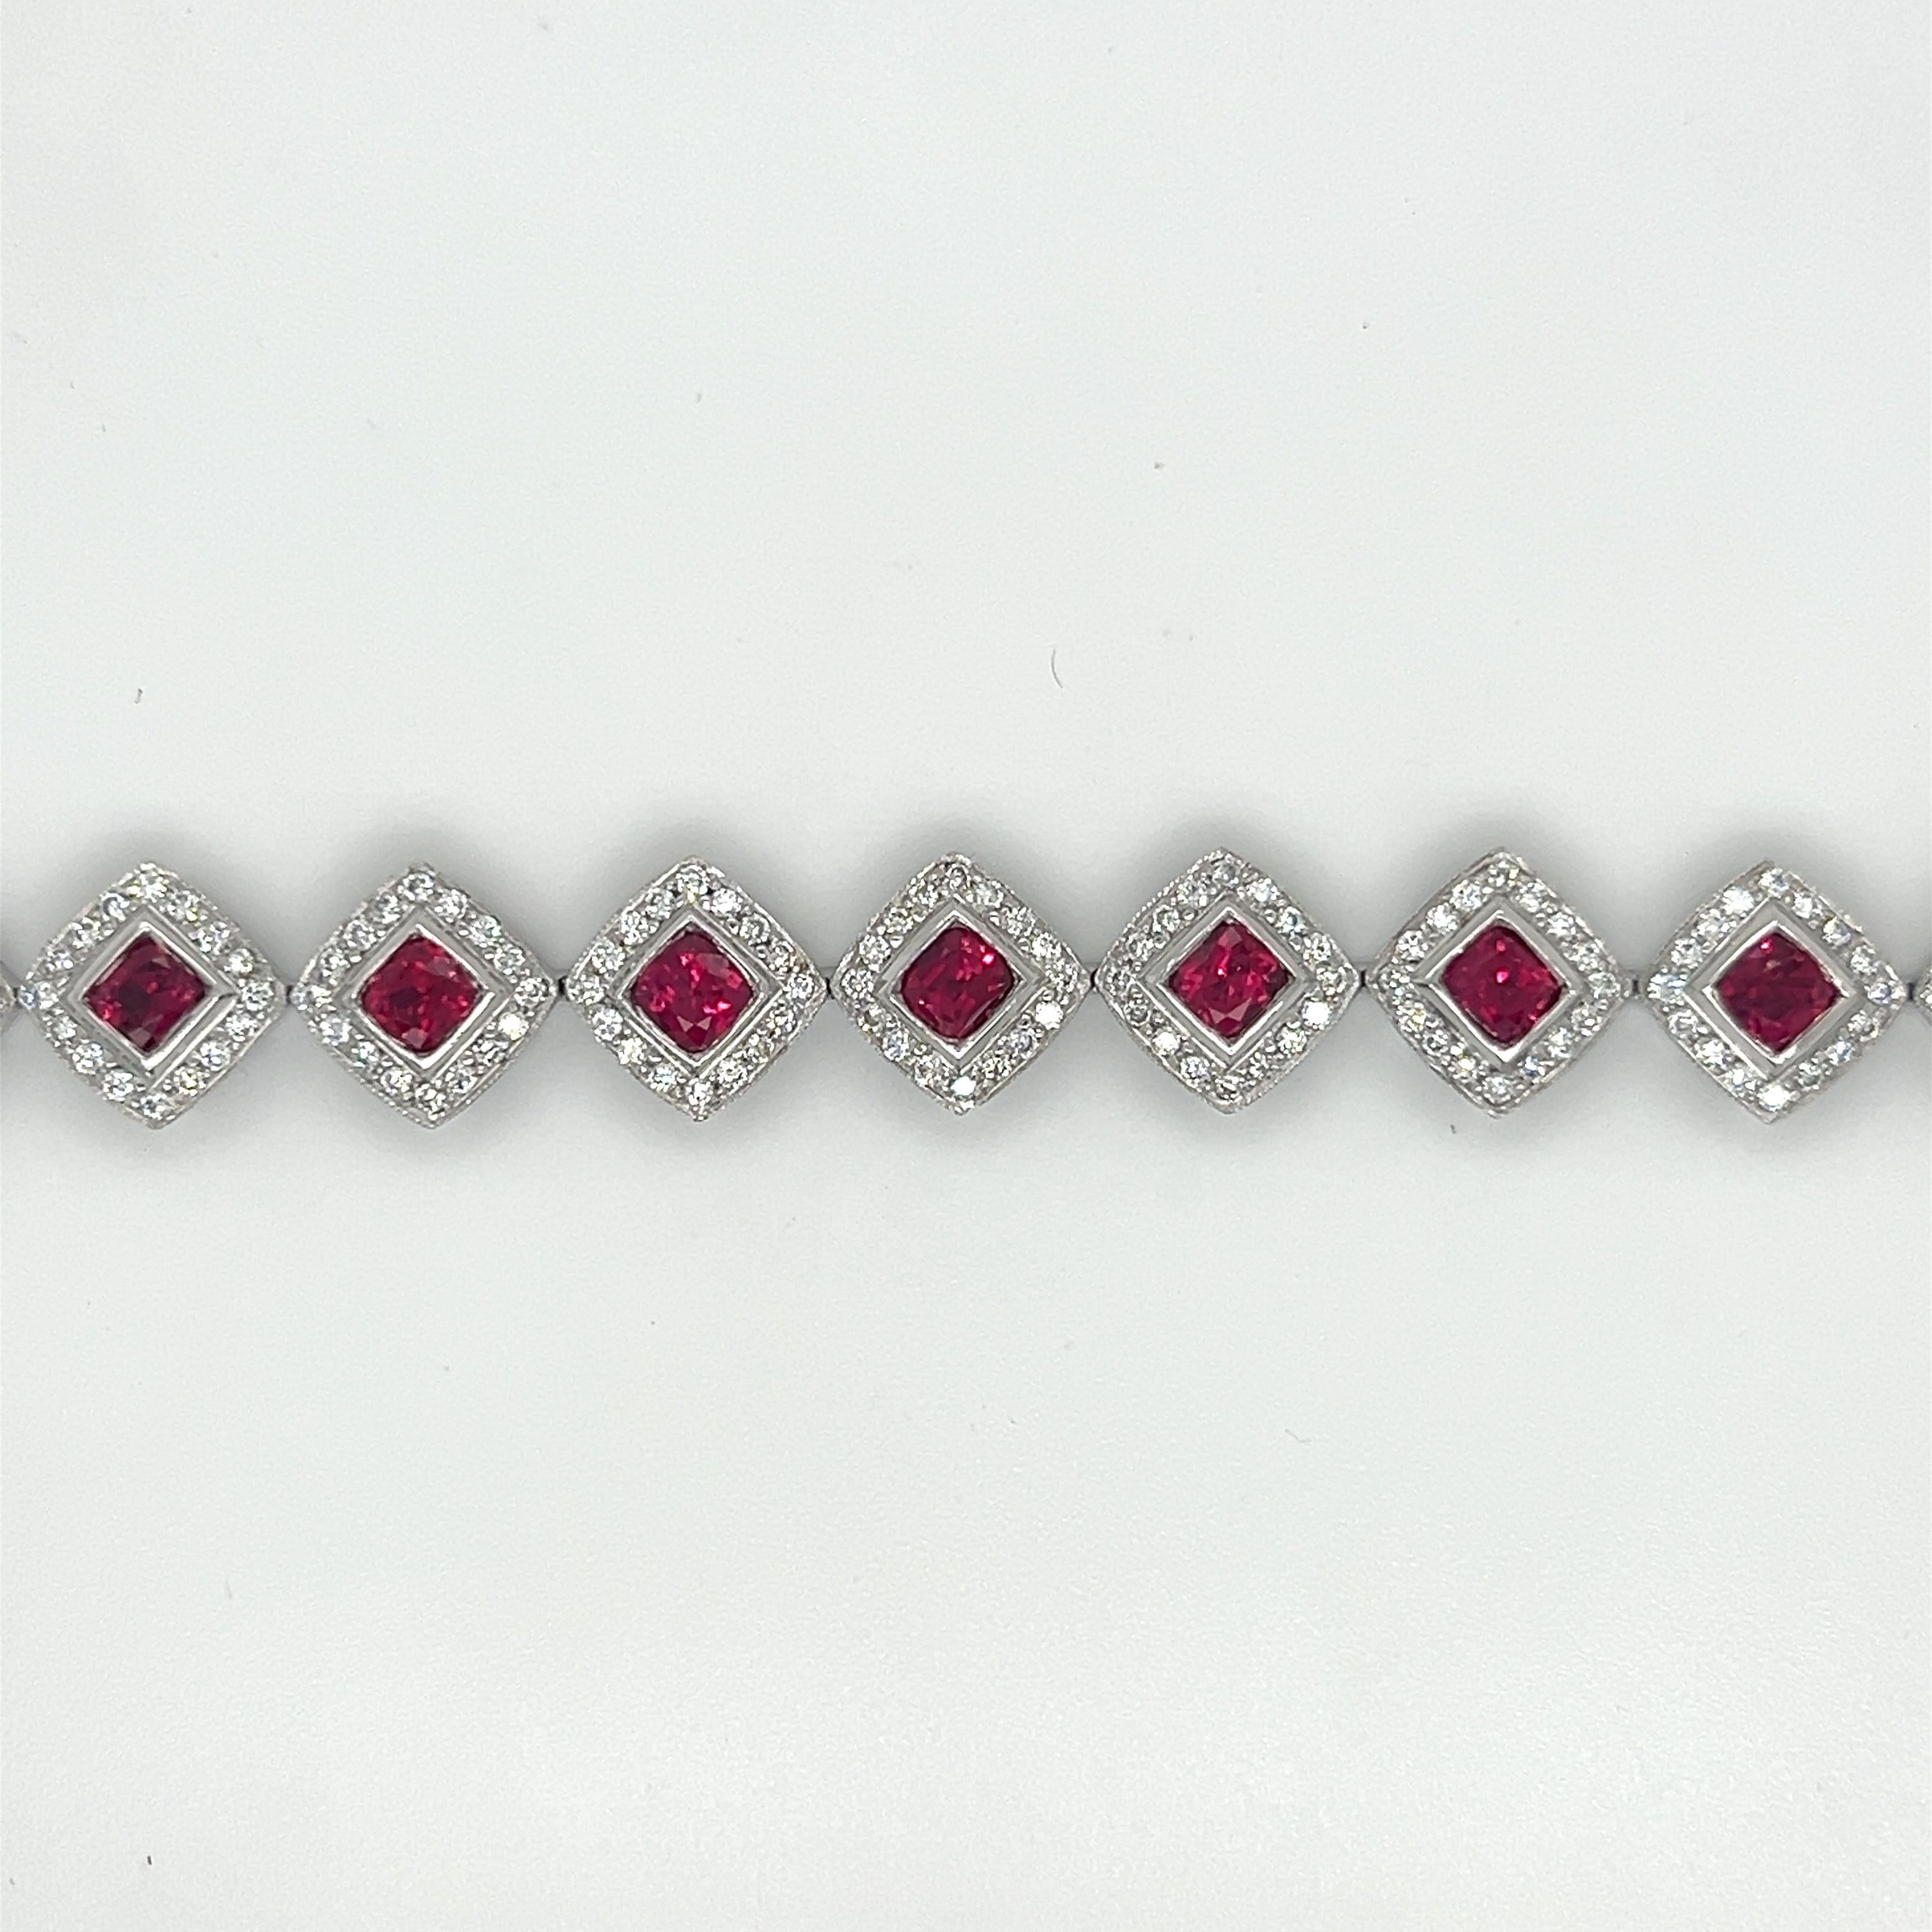 Crafted in platinum, this piece features 6.55 carats of rubies and 2.45 carats of diamonds. The diamonds are G color, and VS1 clarity. The backside of the bracelet has heart shape metal work.